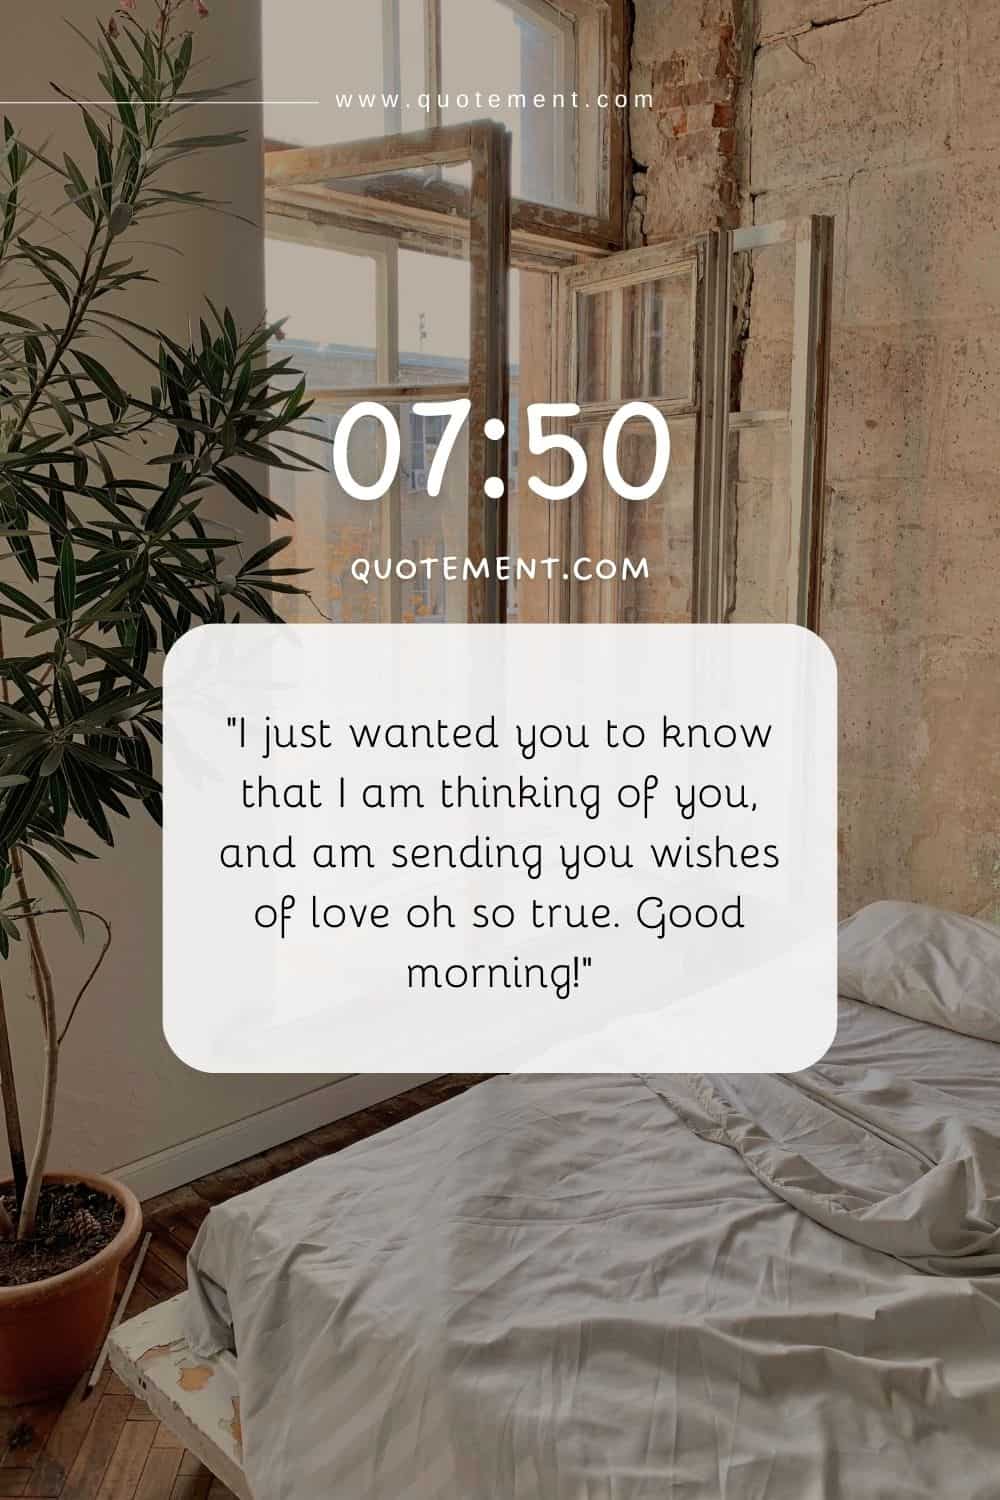 message in a white square on a bedroom-themed phone screen